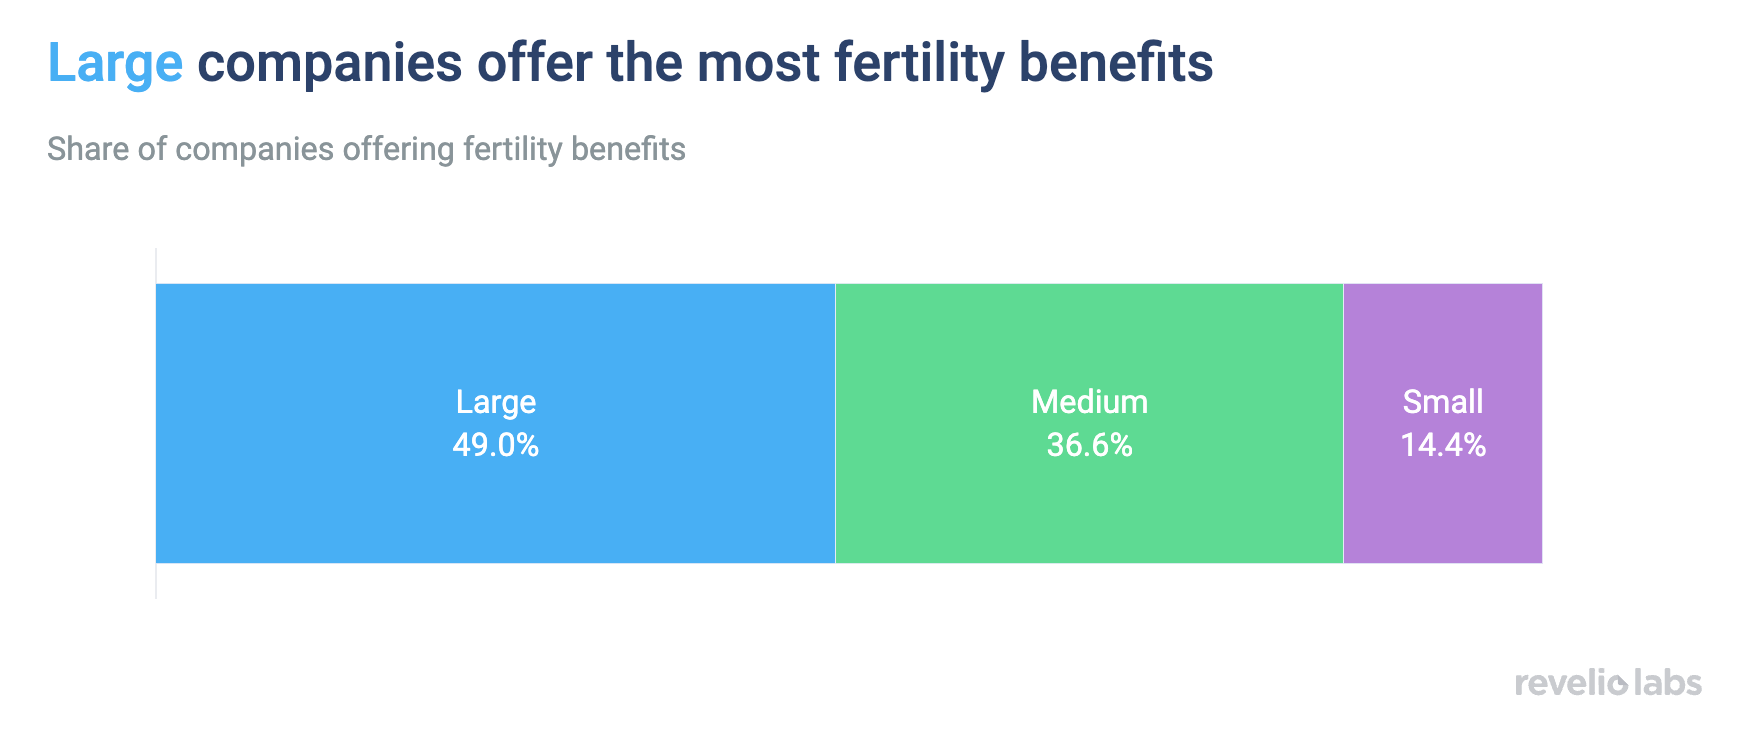 Large companies offer the most fertility benefits